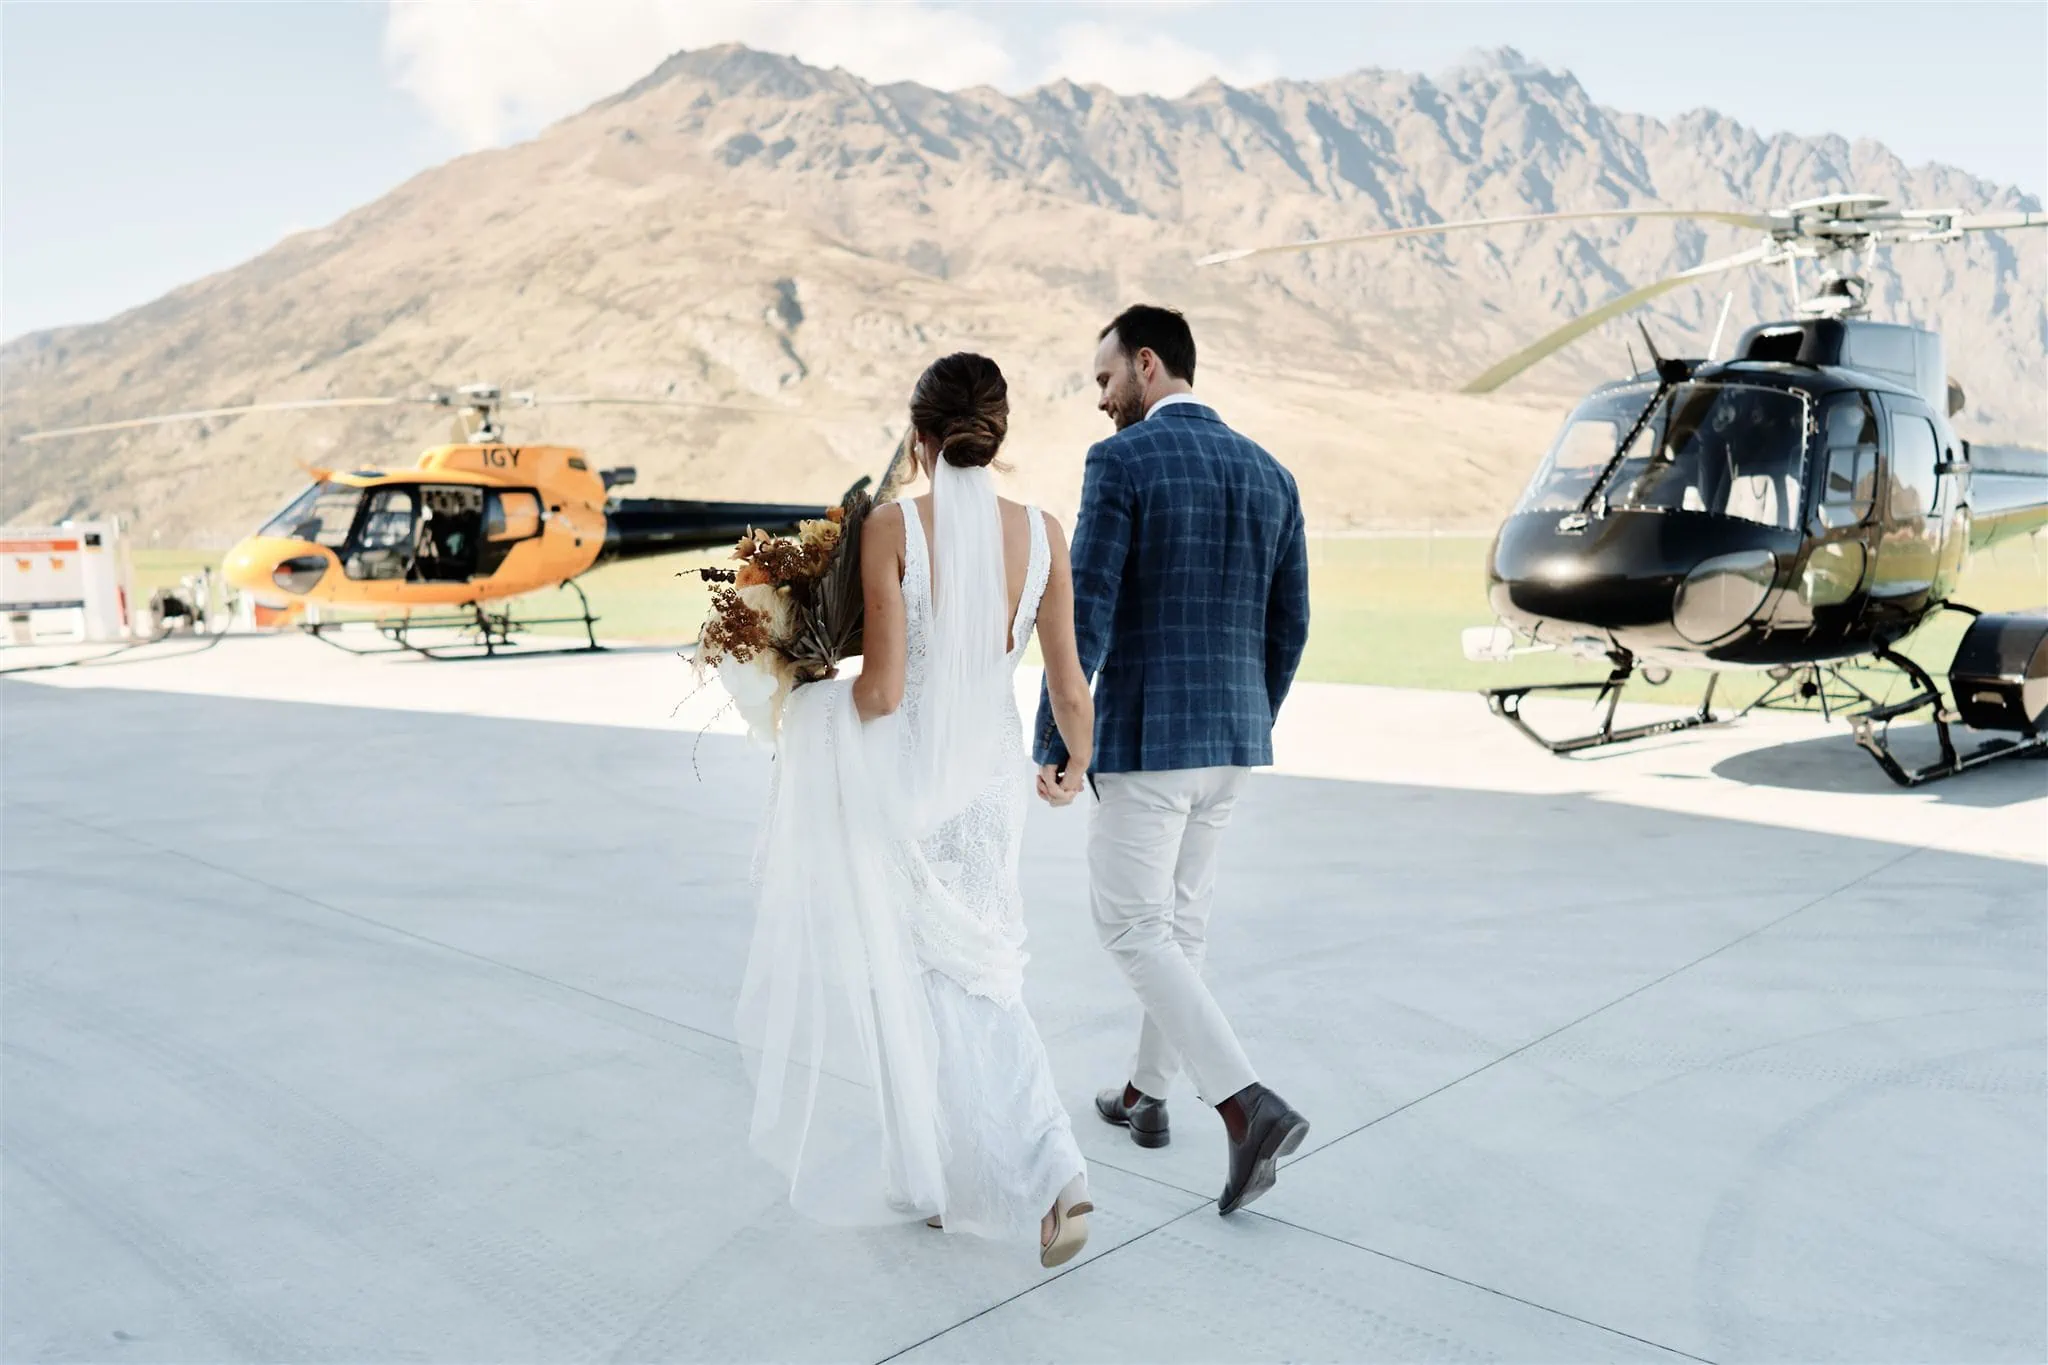 Queenstown New Zealand Elopement Wedding Photographer - The Ultimate Queenstown Elopement Wedding Guide featuring a bride and groom walking towards a helicopter.